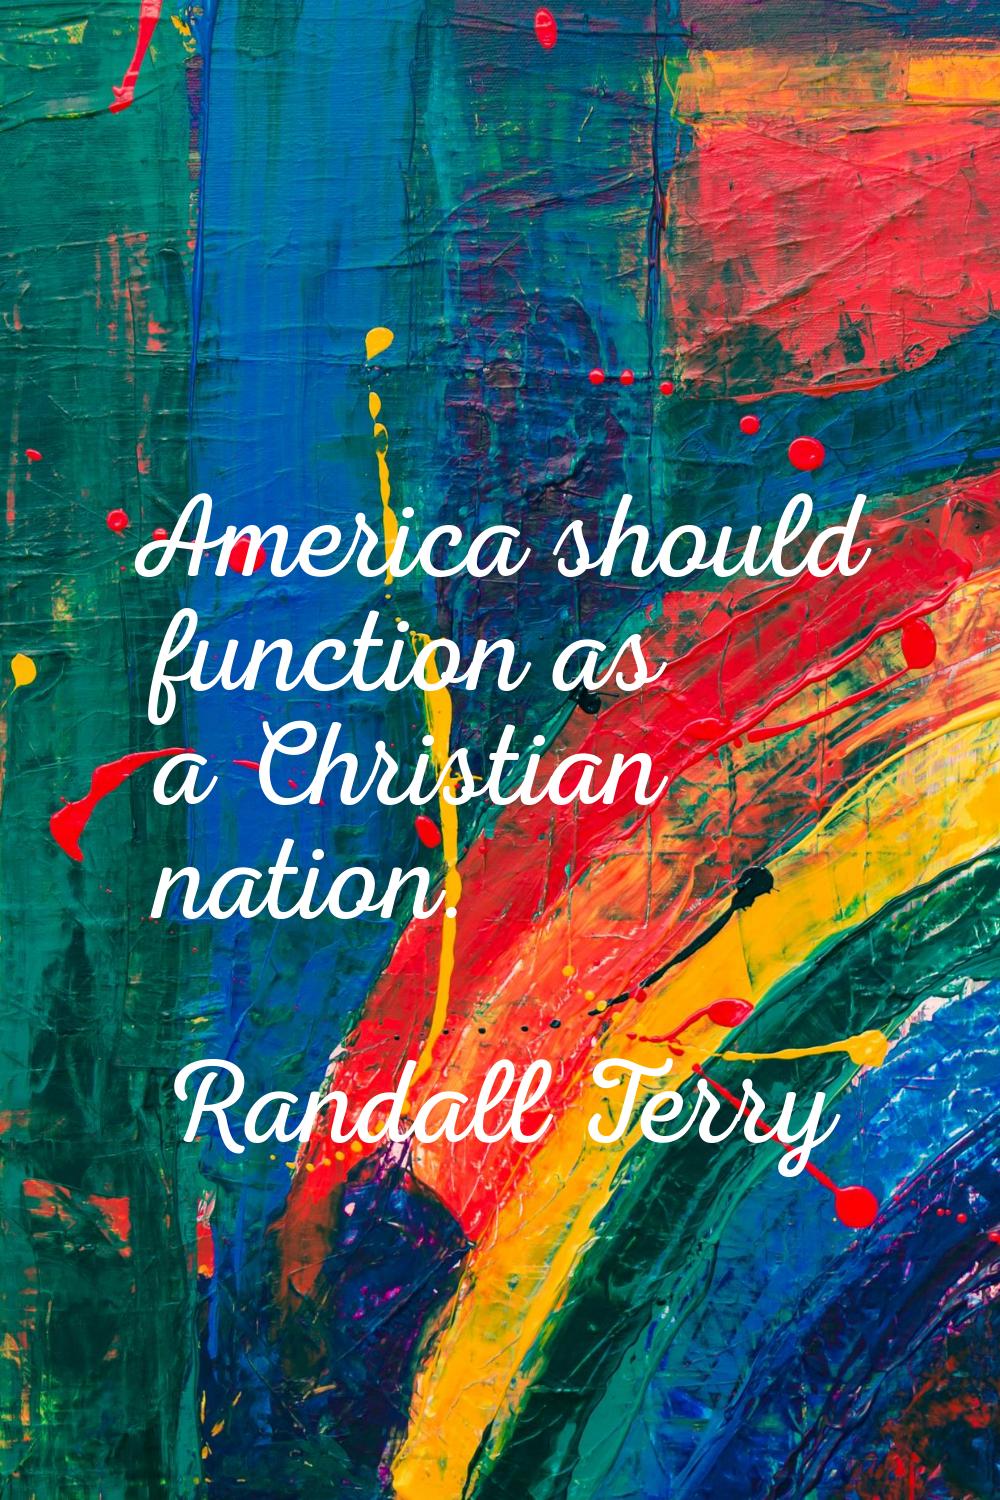 America should function as a Christian nation.